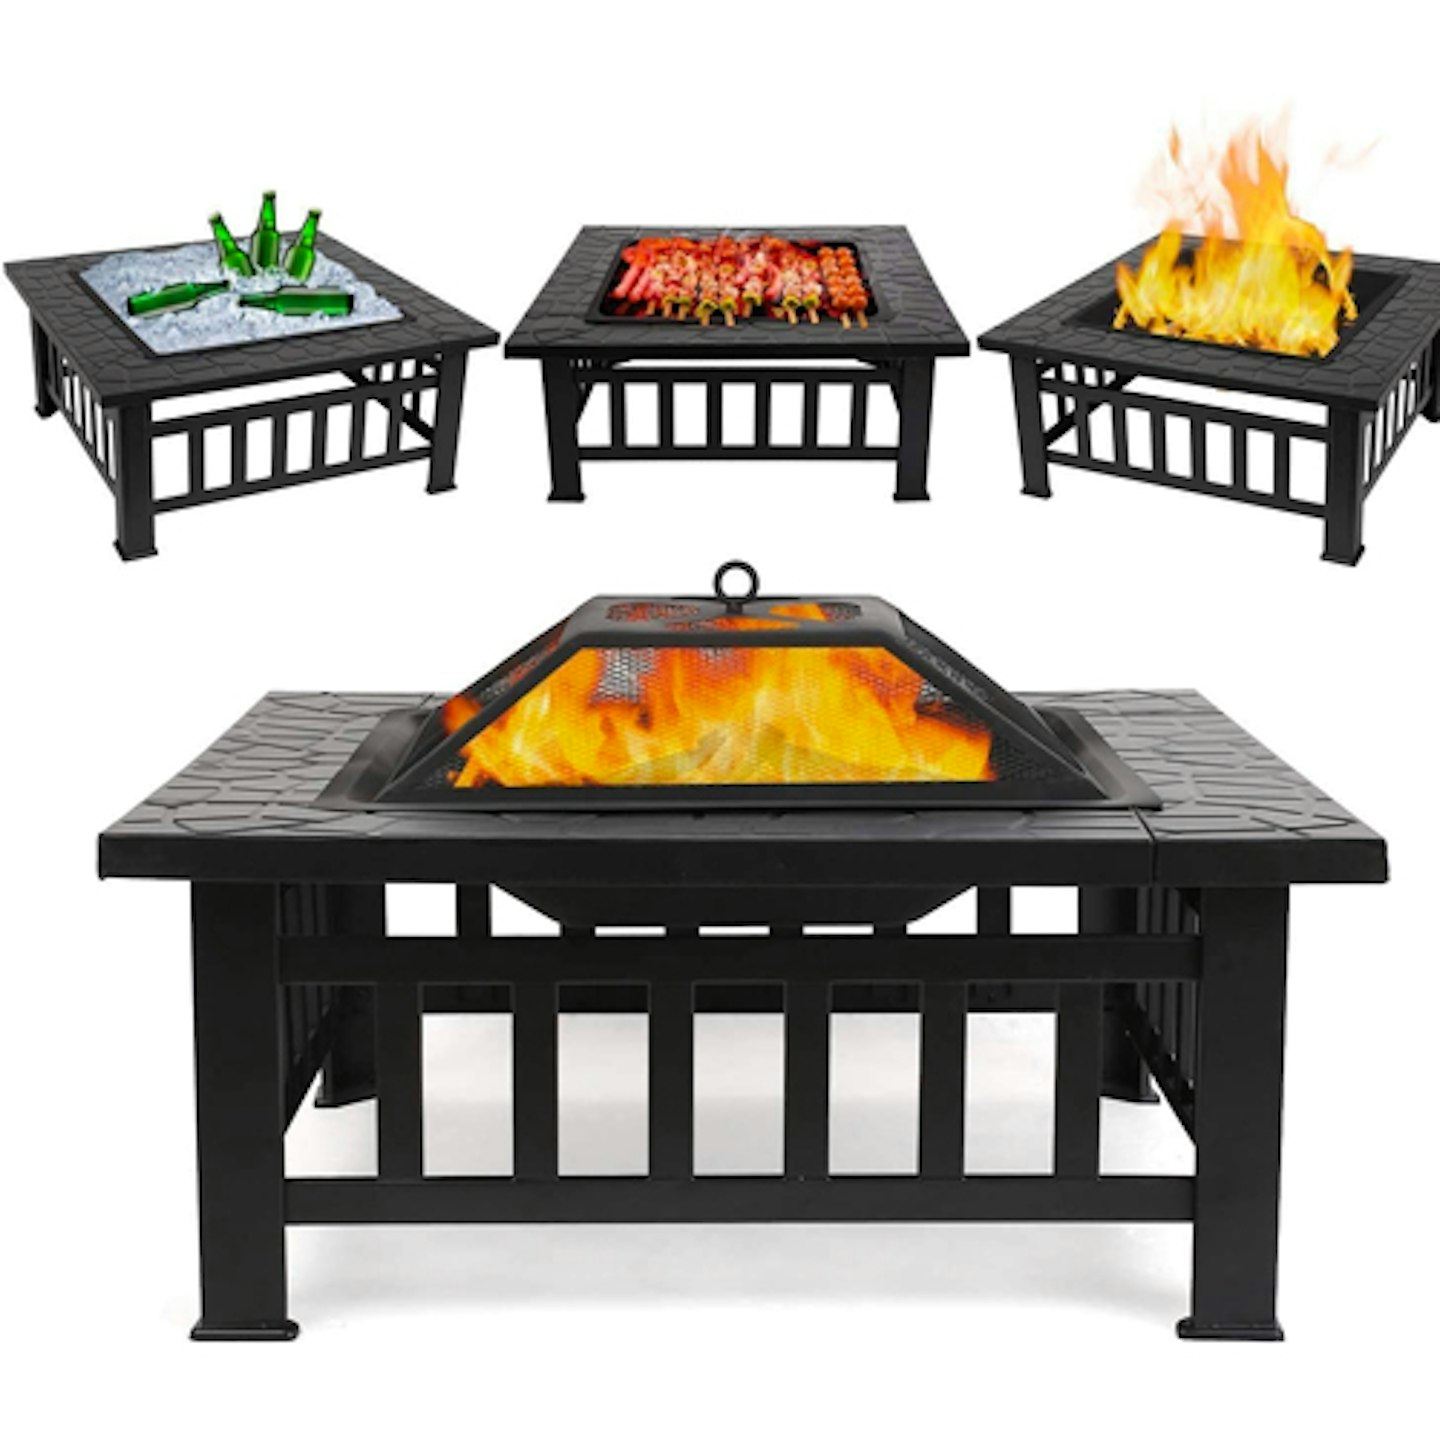 Femor Large 3 in 1 Fire Pit